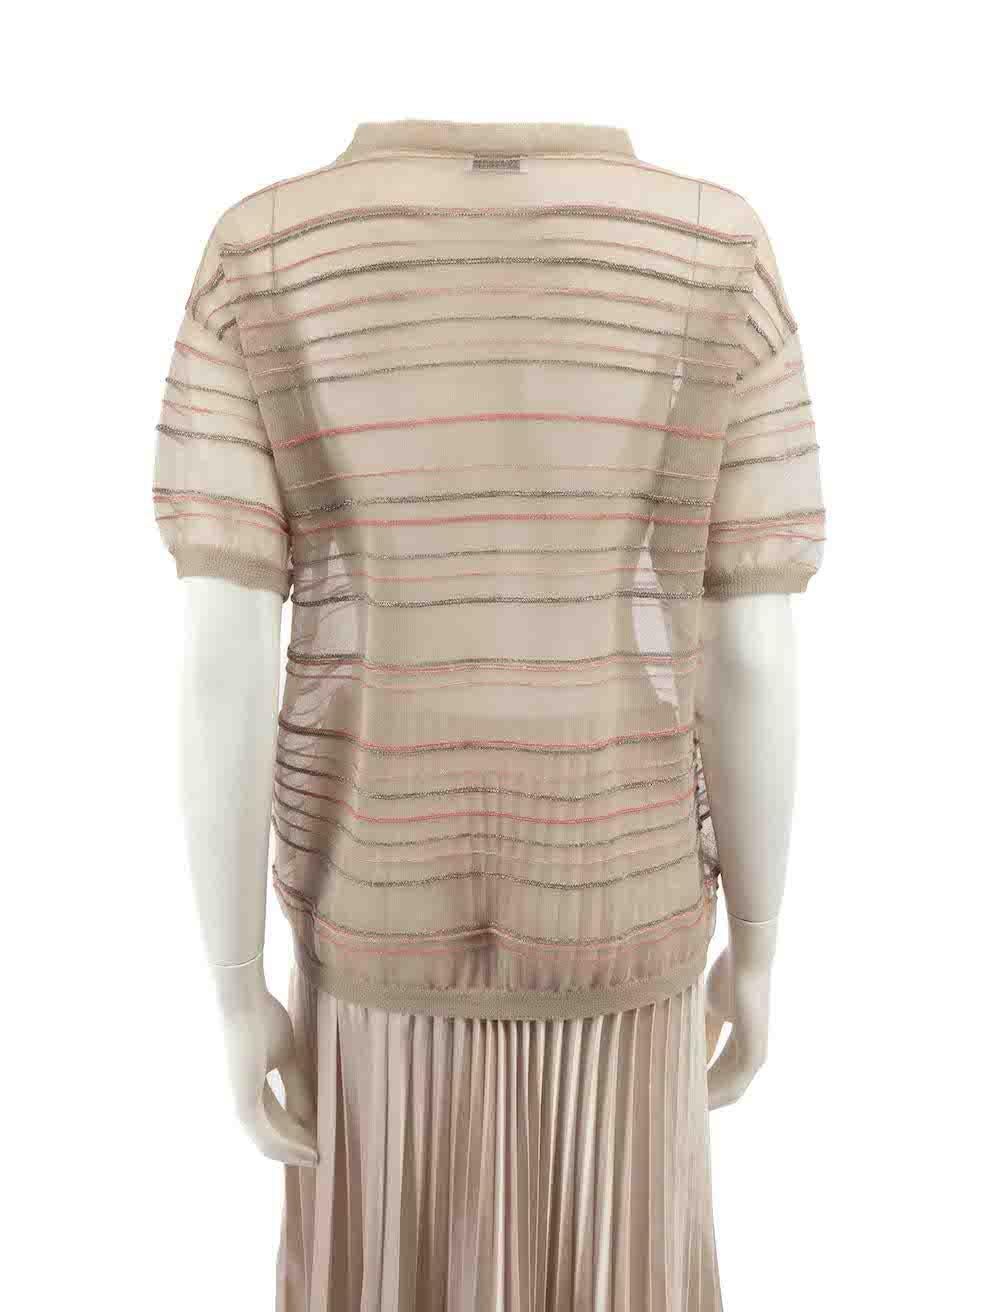 Brunello Cucinelli Beige Mesh Striped Metallic Top Size S In Excellent Condition For Sale In London, GB